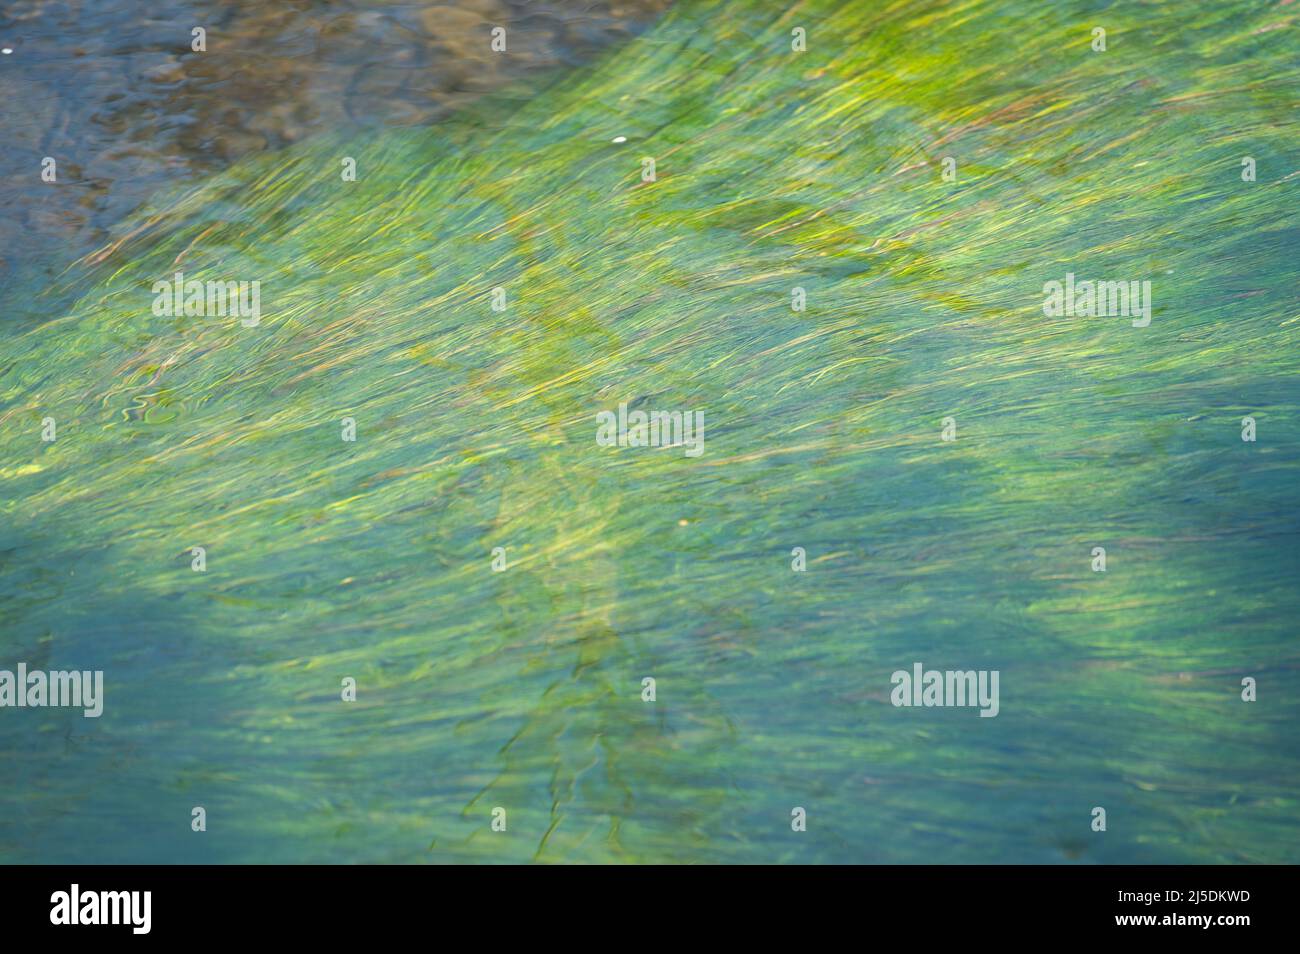 Ranunculus aquatic weed growing underwater in River Cynin, St Clears, Carmarthenshire, Wales, UK Stock Photo